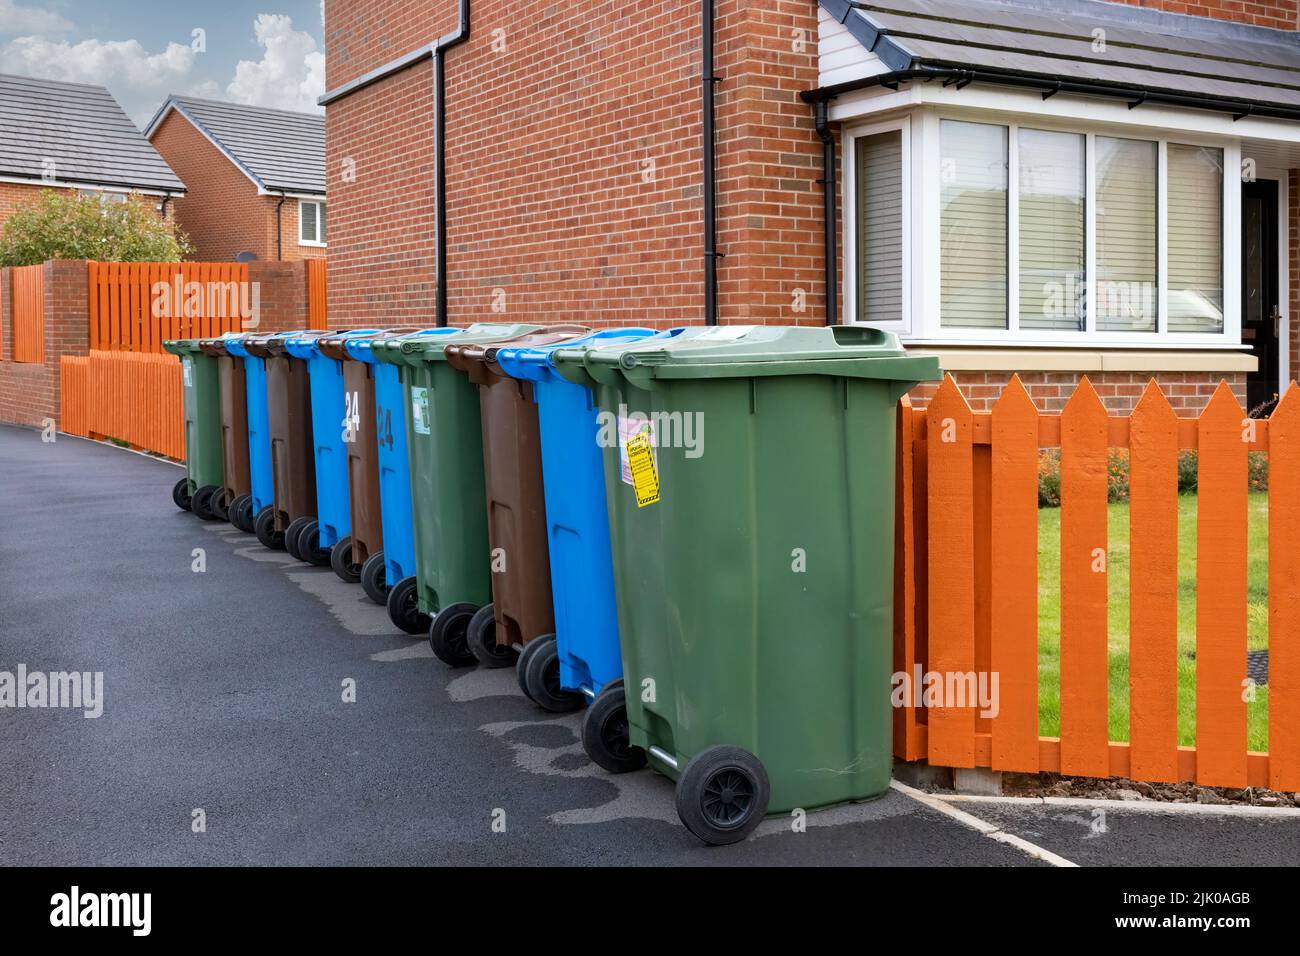 A row of coloured wheelie bins for recycling plastic, paper and garden waste, alongside an orange fence and outside a modern house. Stock Photo